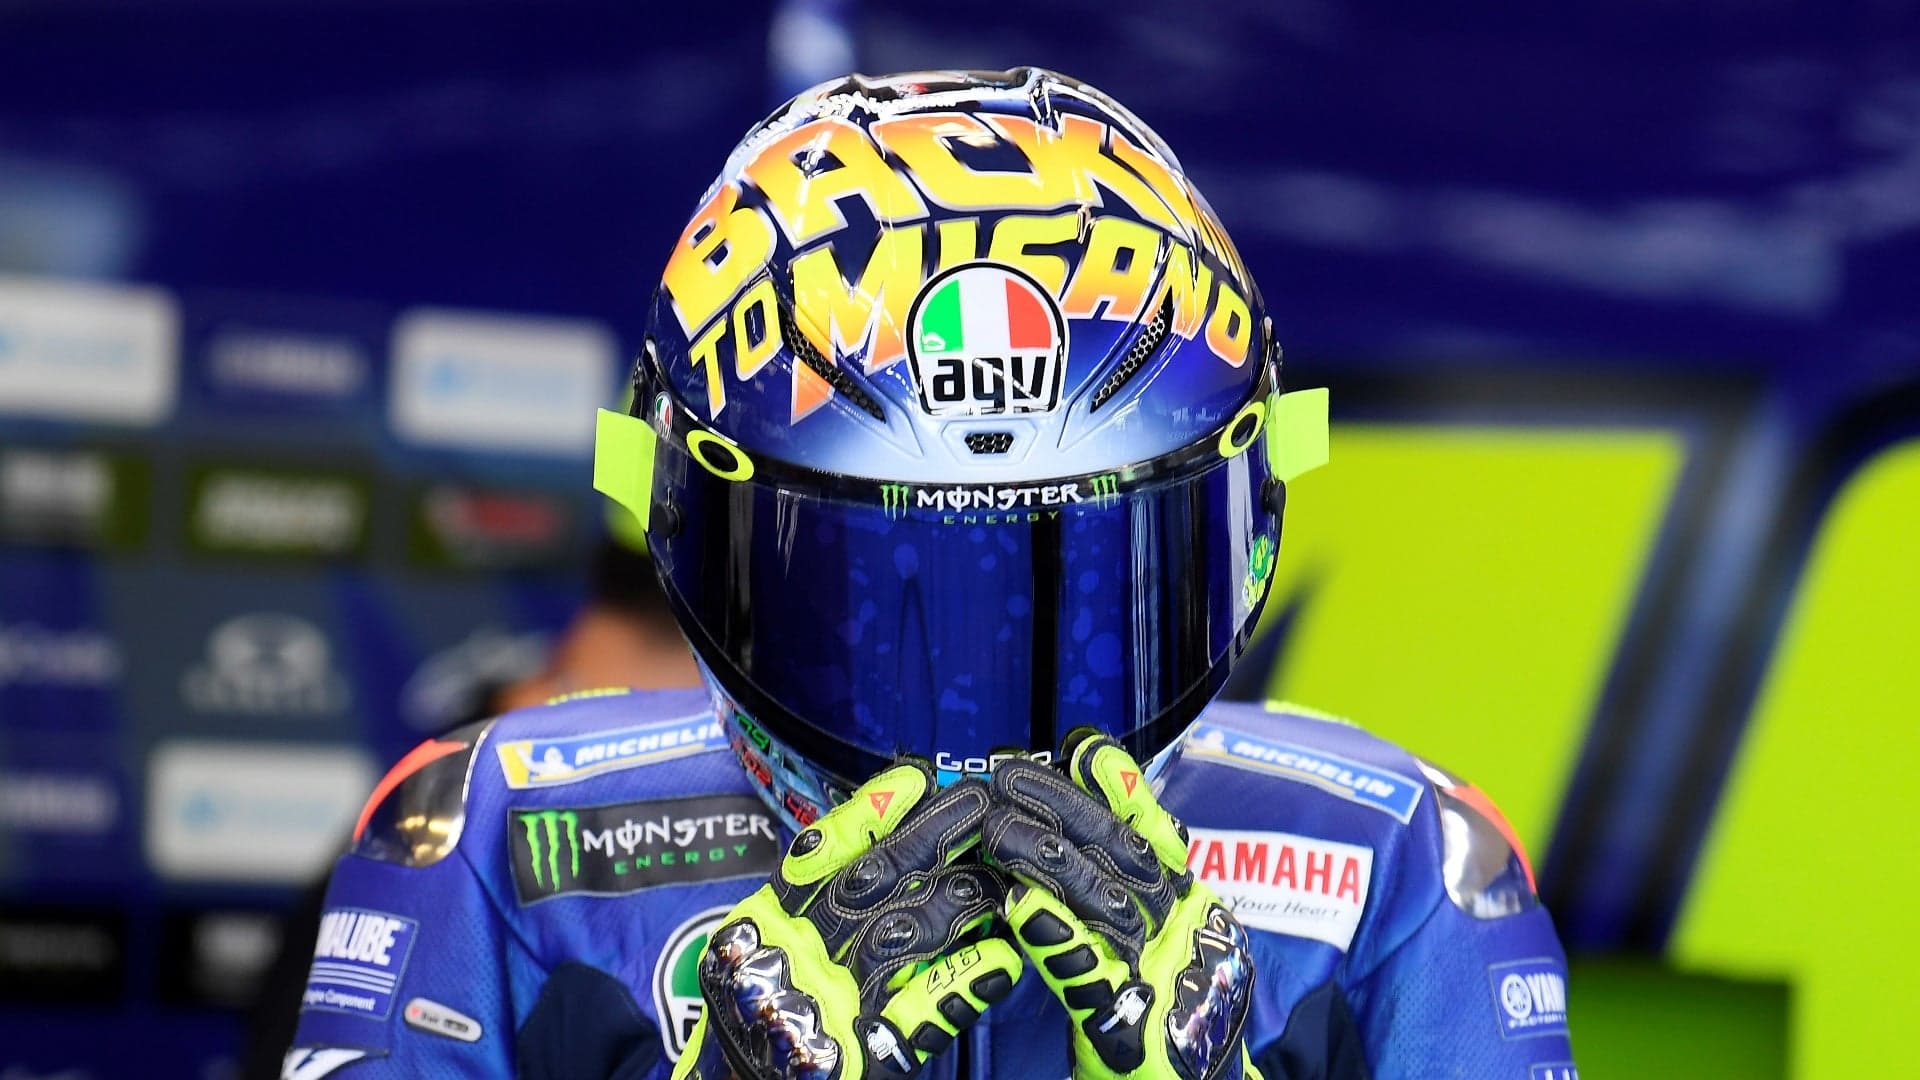 Check Out Valentino Rossi’s Time-Traveling ‘Back to Misano’ AGV Helmet